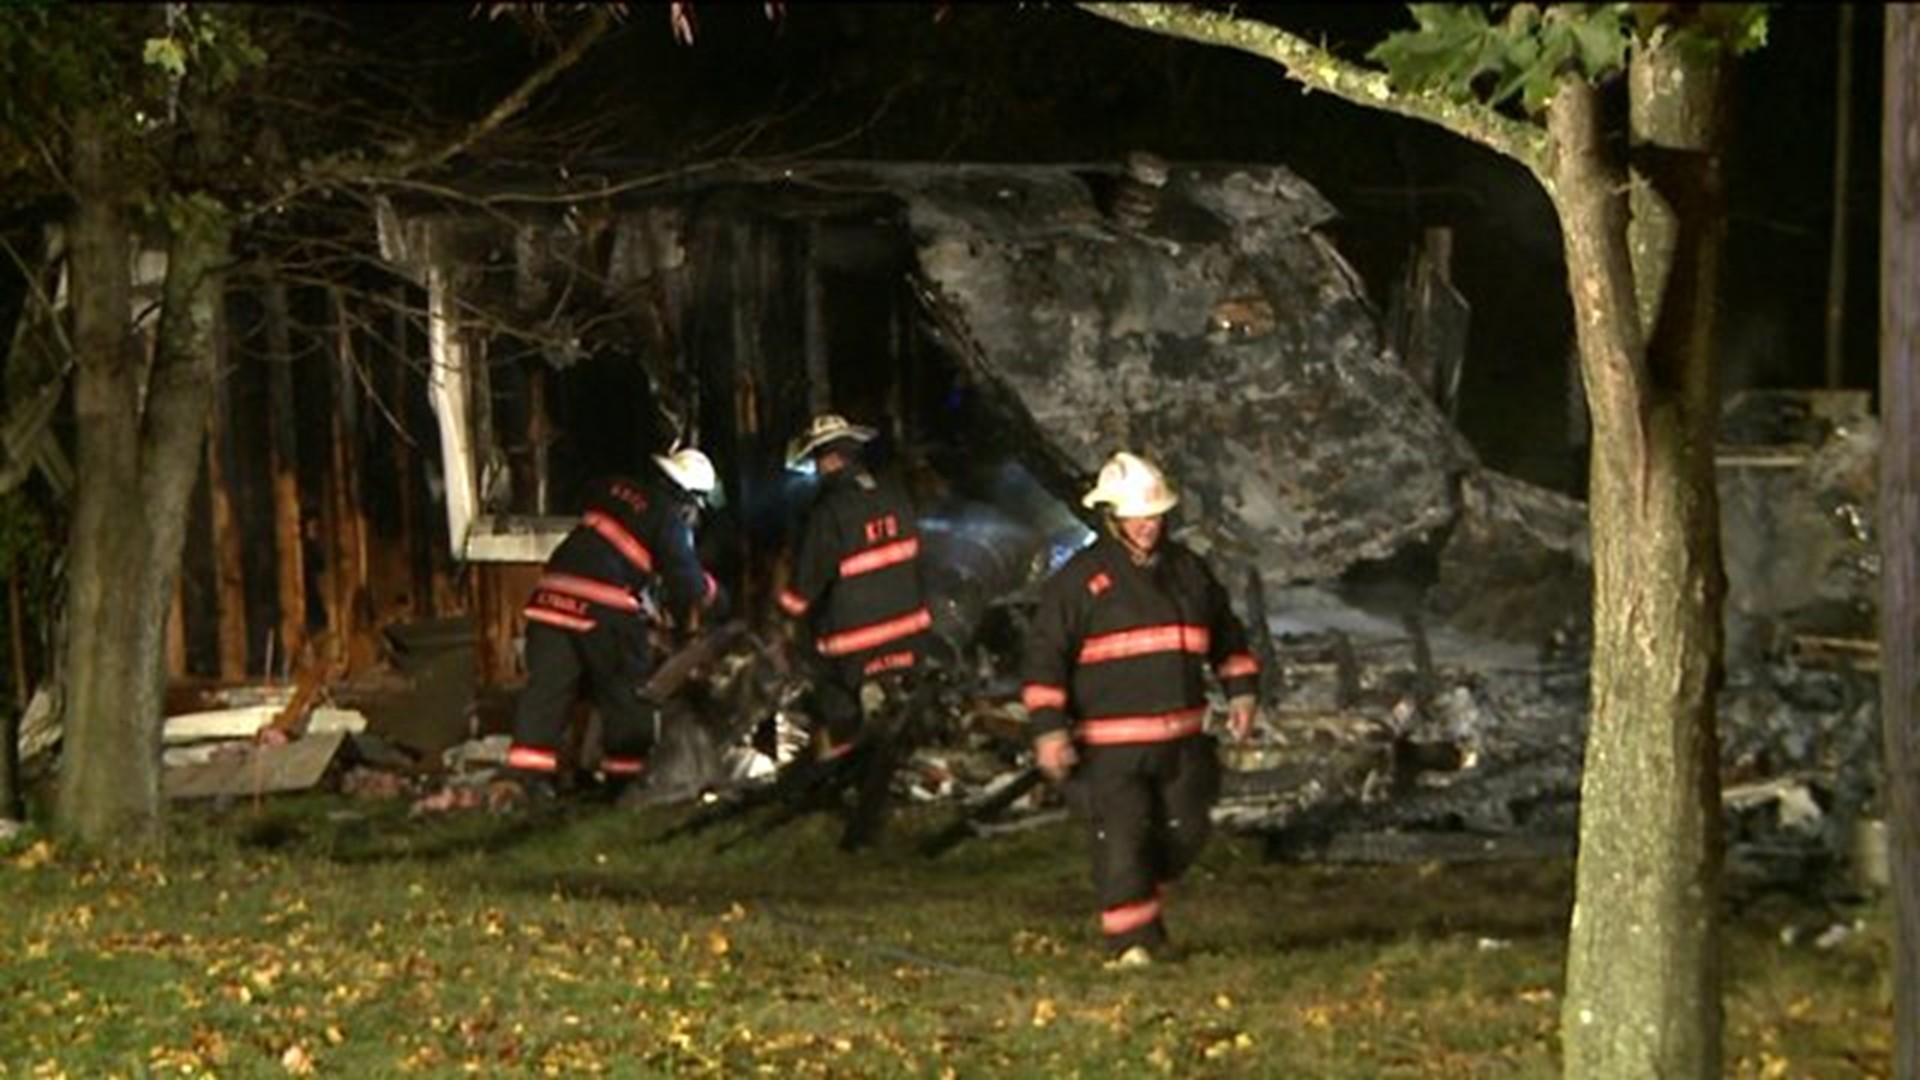 Mobile Home Leveled by Fire in Monroe County